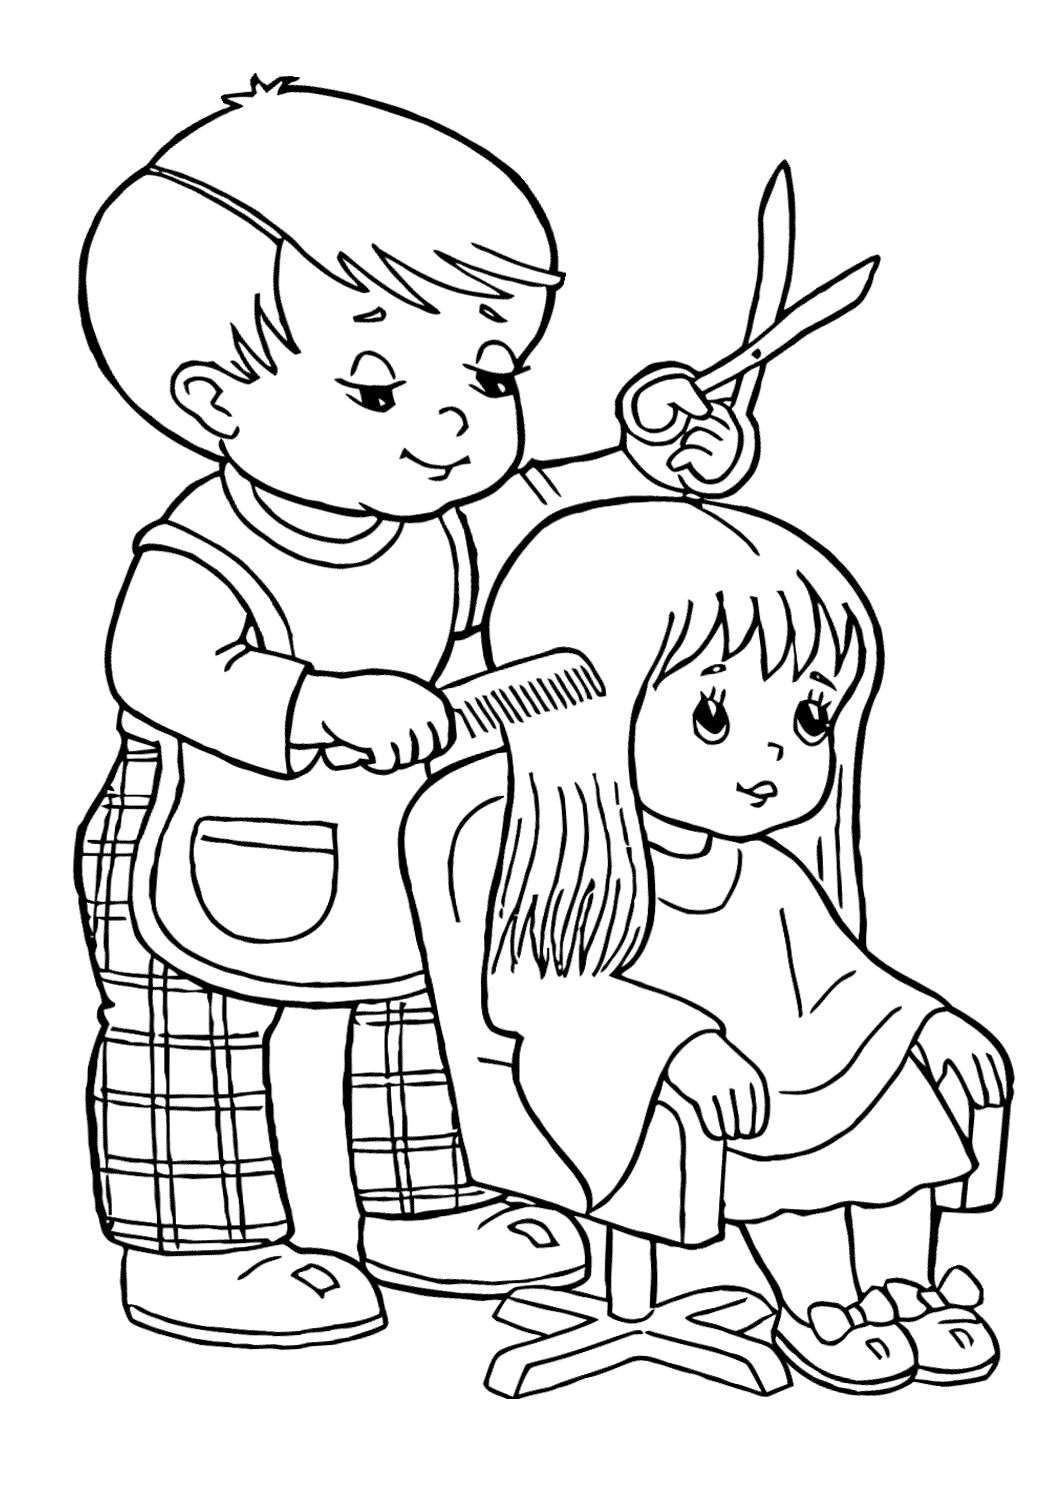 Young Barber Coloring Page